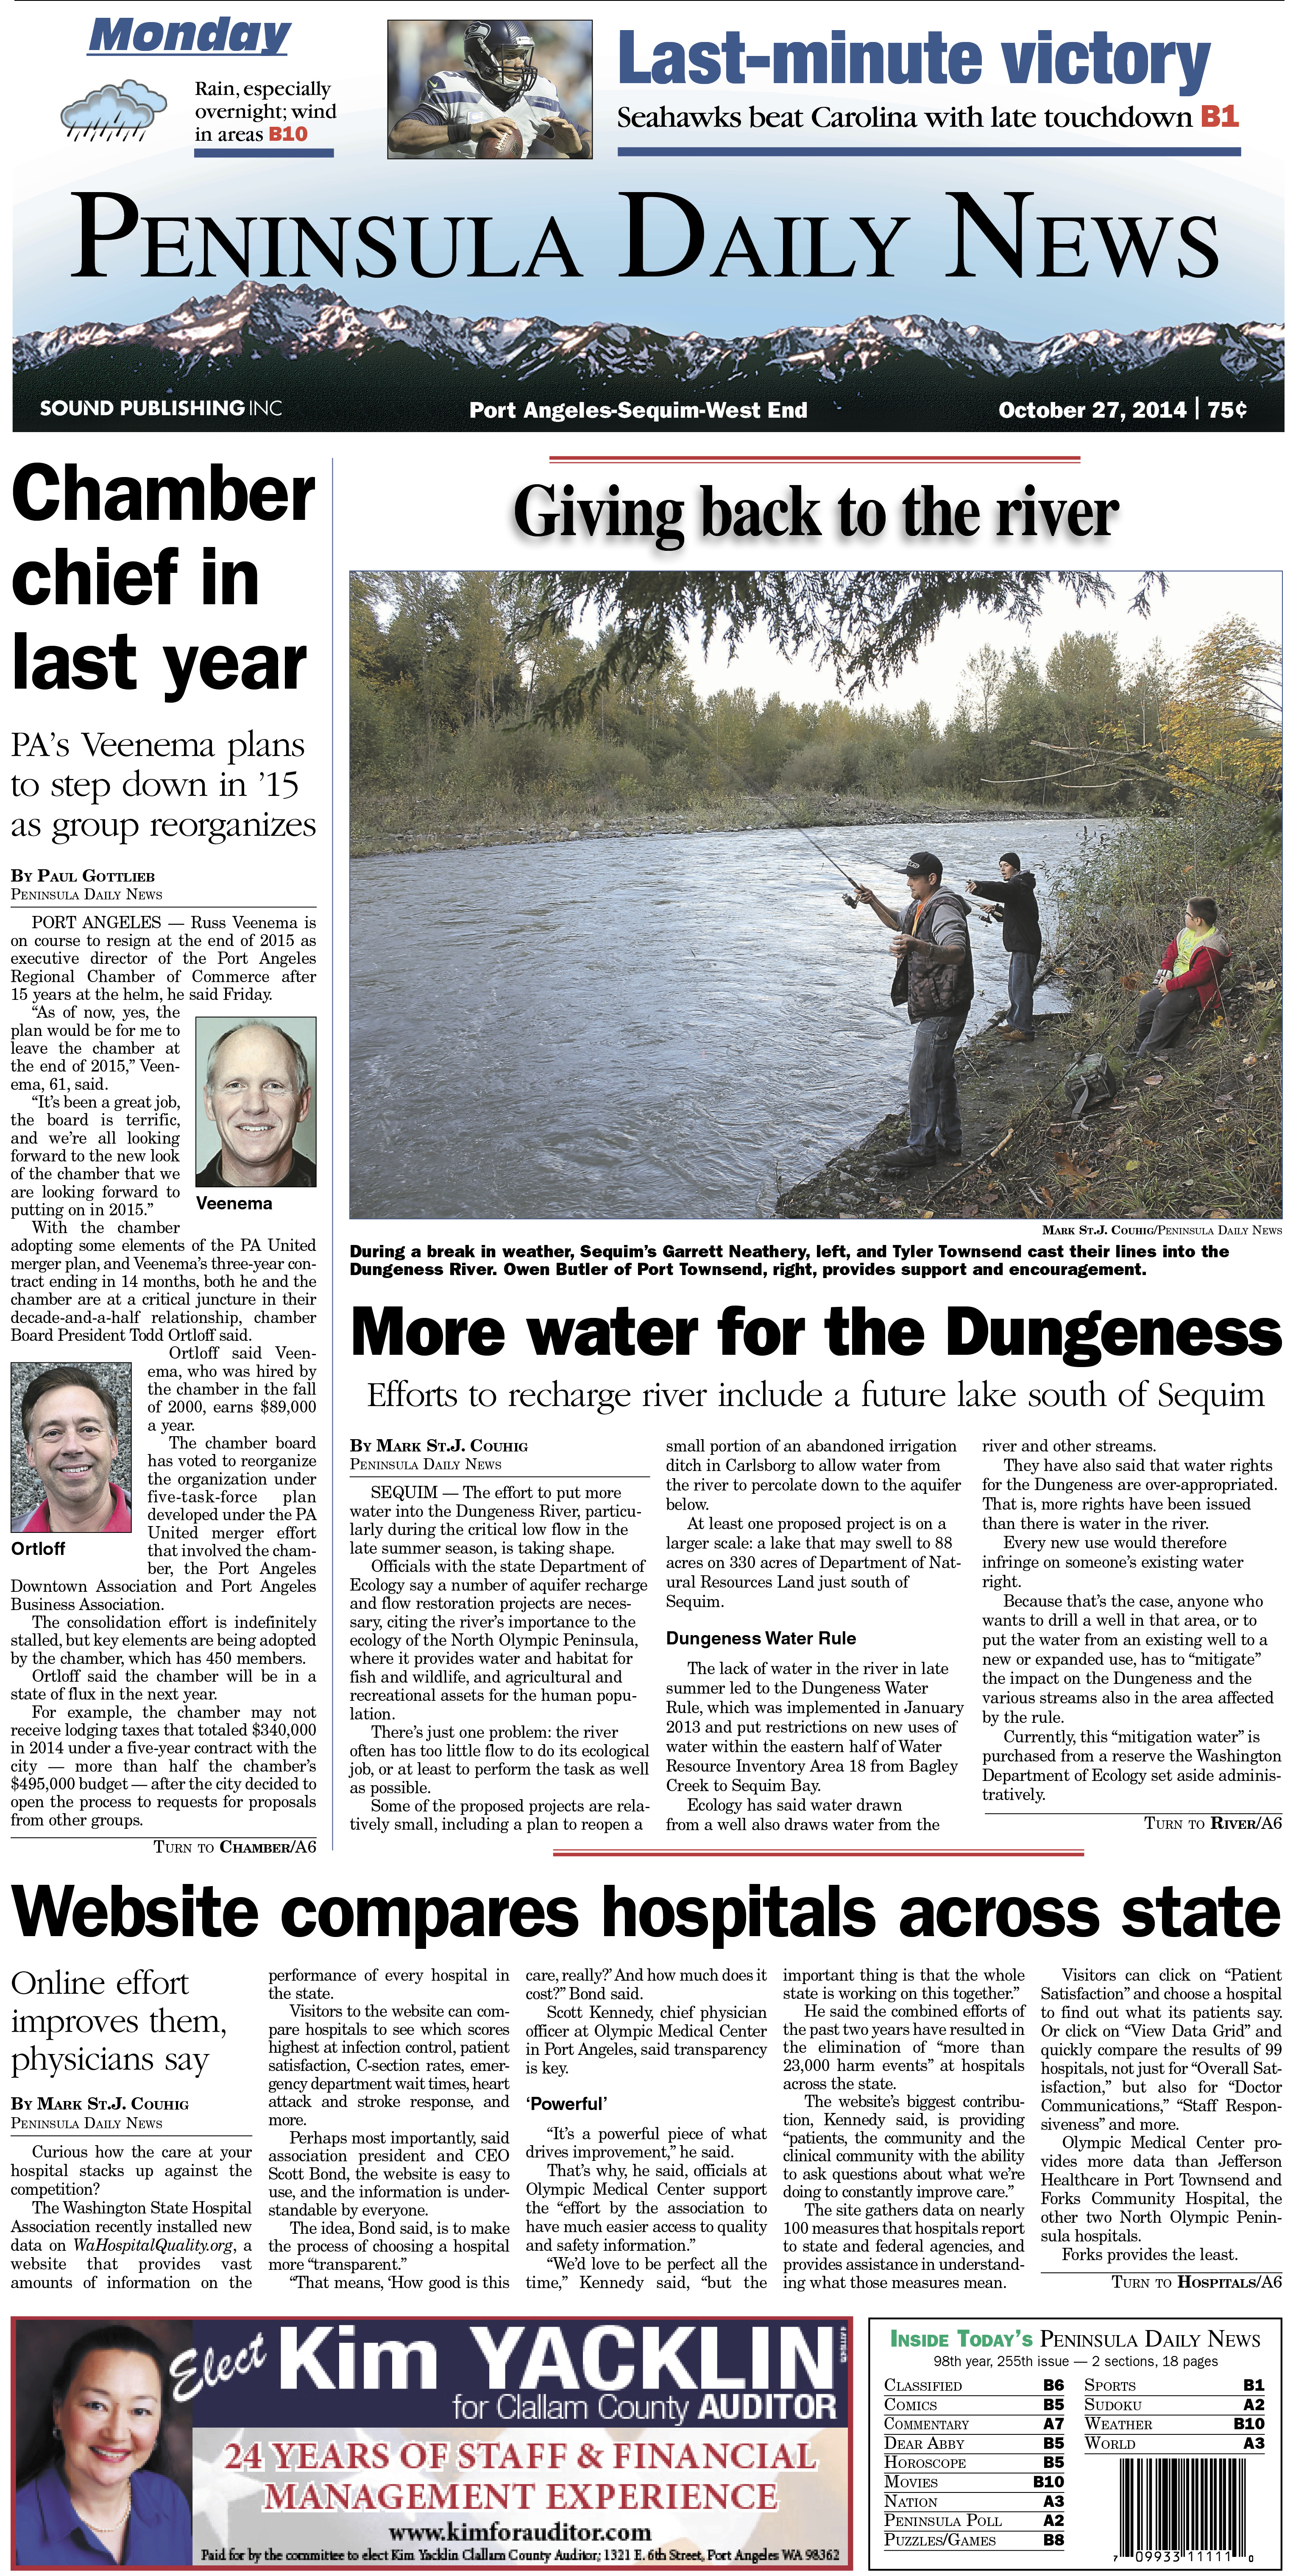 Here is today's Clallam County front page — news tailored to your community. There's more inside that isn't online!